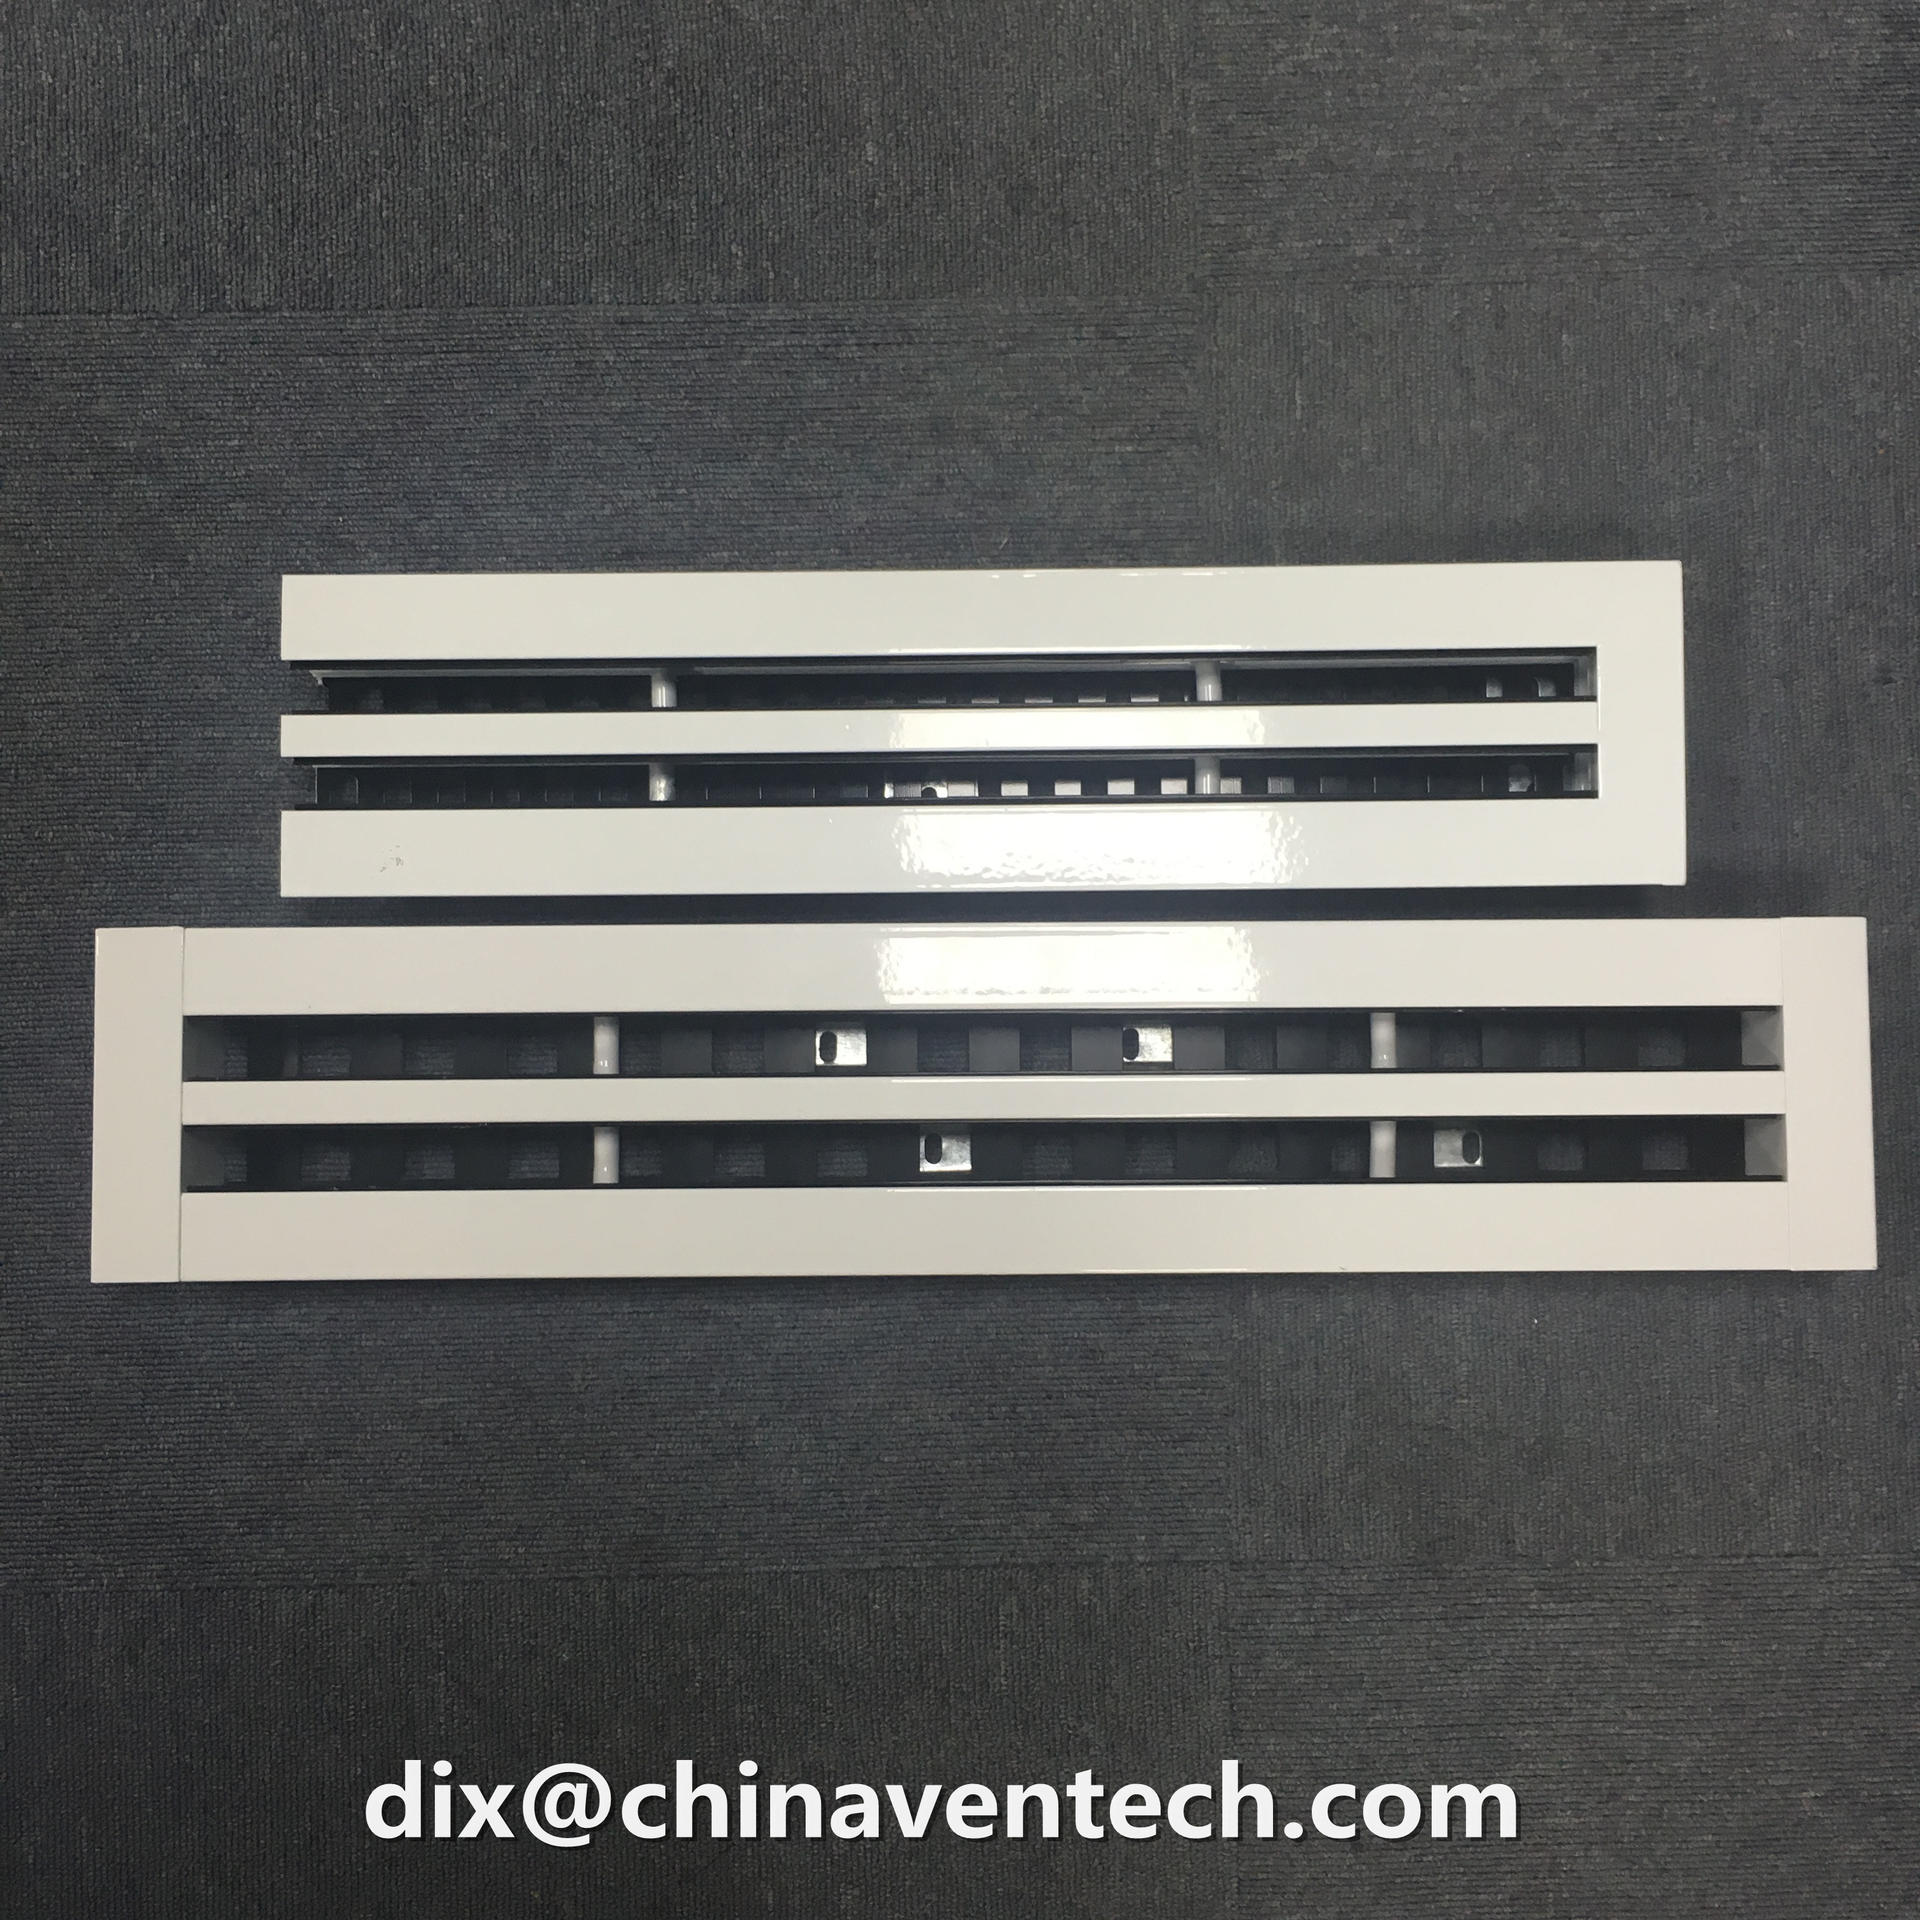 Hvac Air Conditioning linear slot diffusers selection VAV slot ceiling diffuser with plenum box